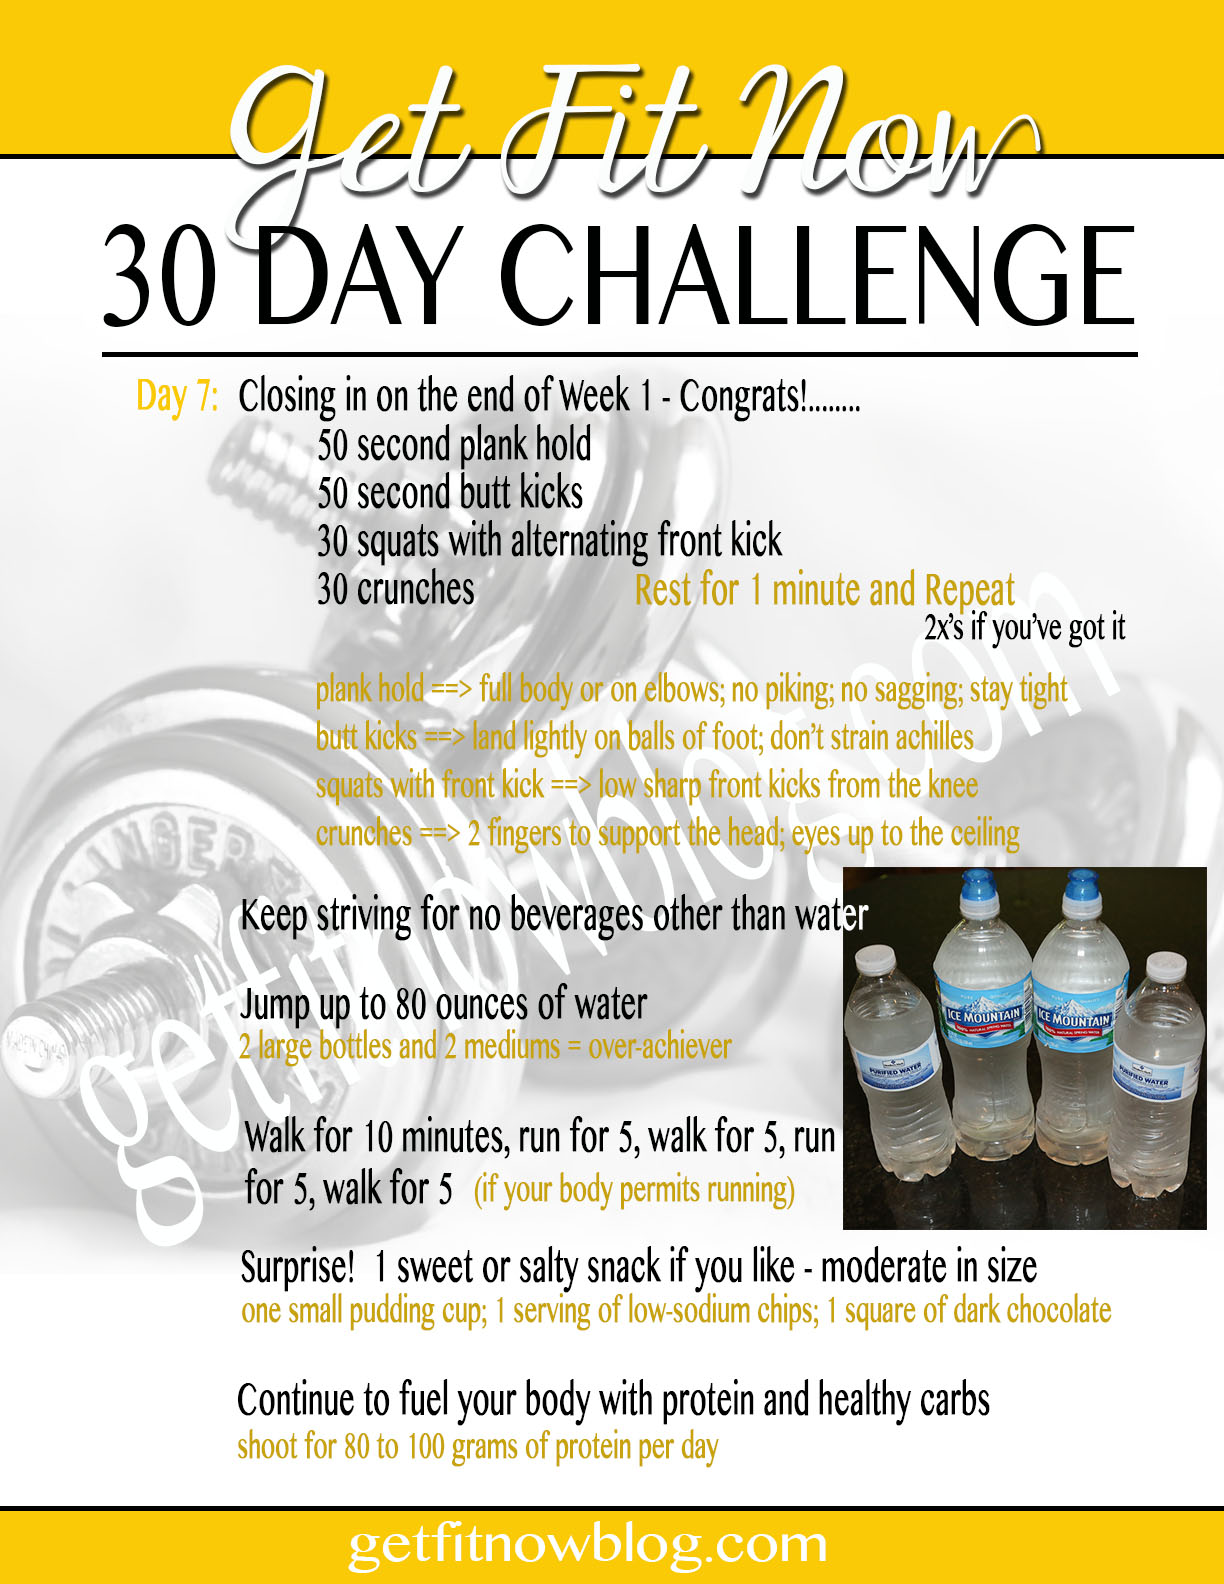 day 7